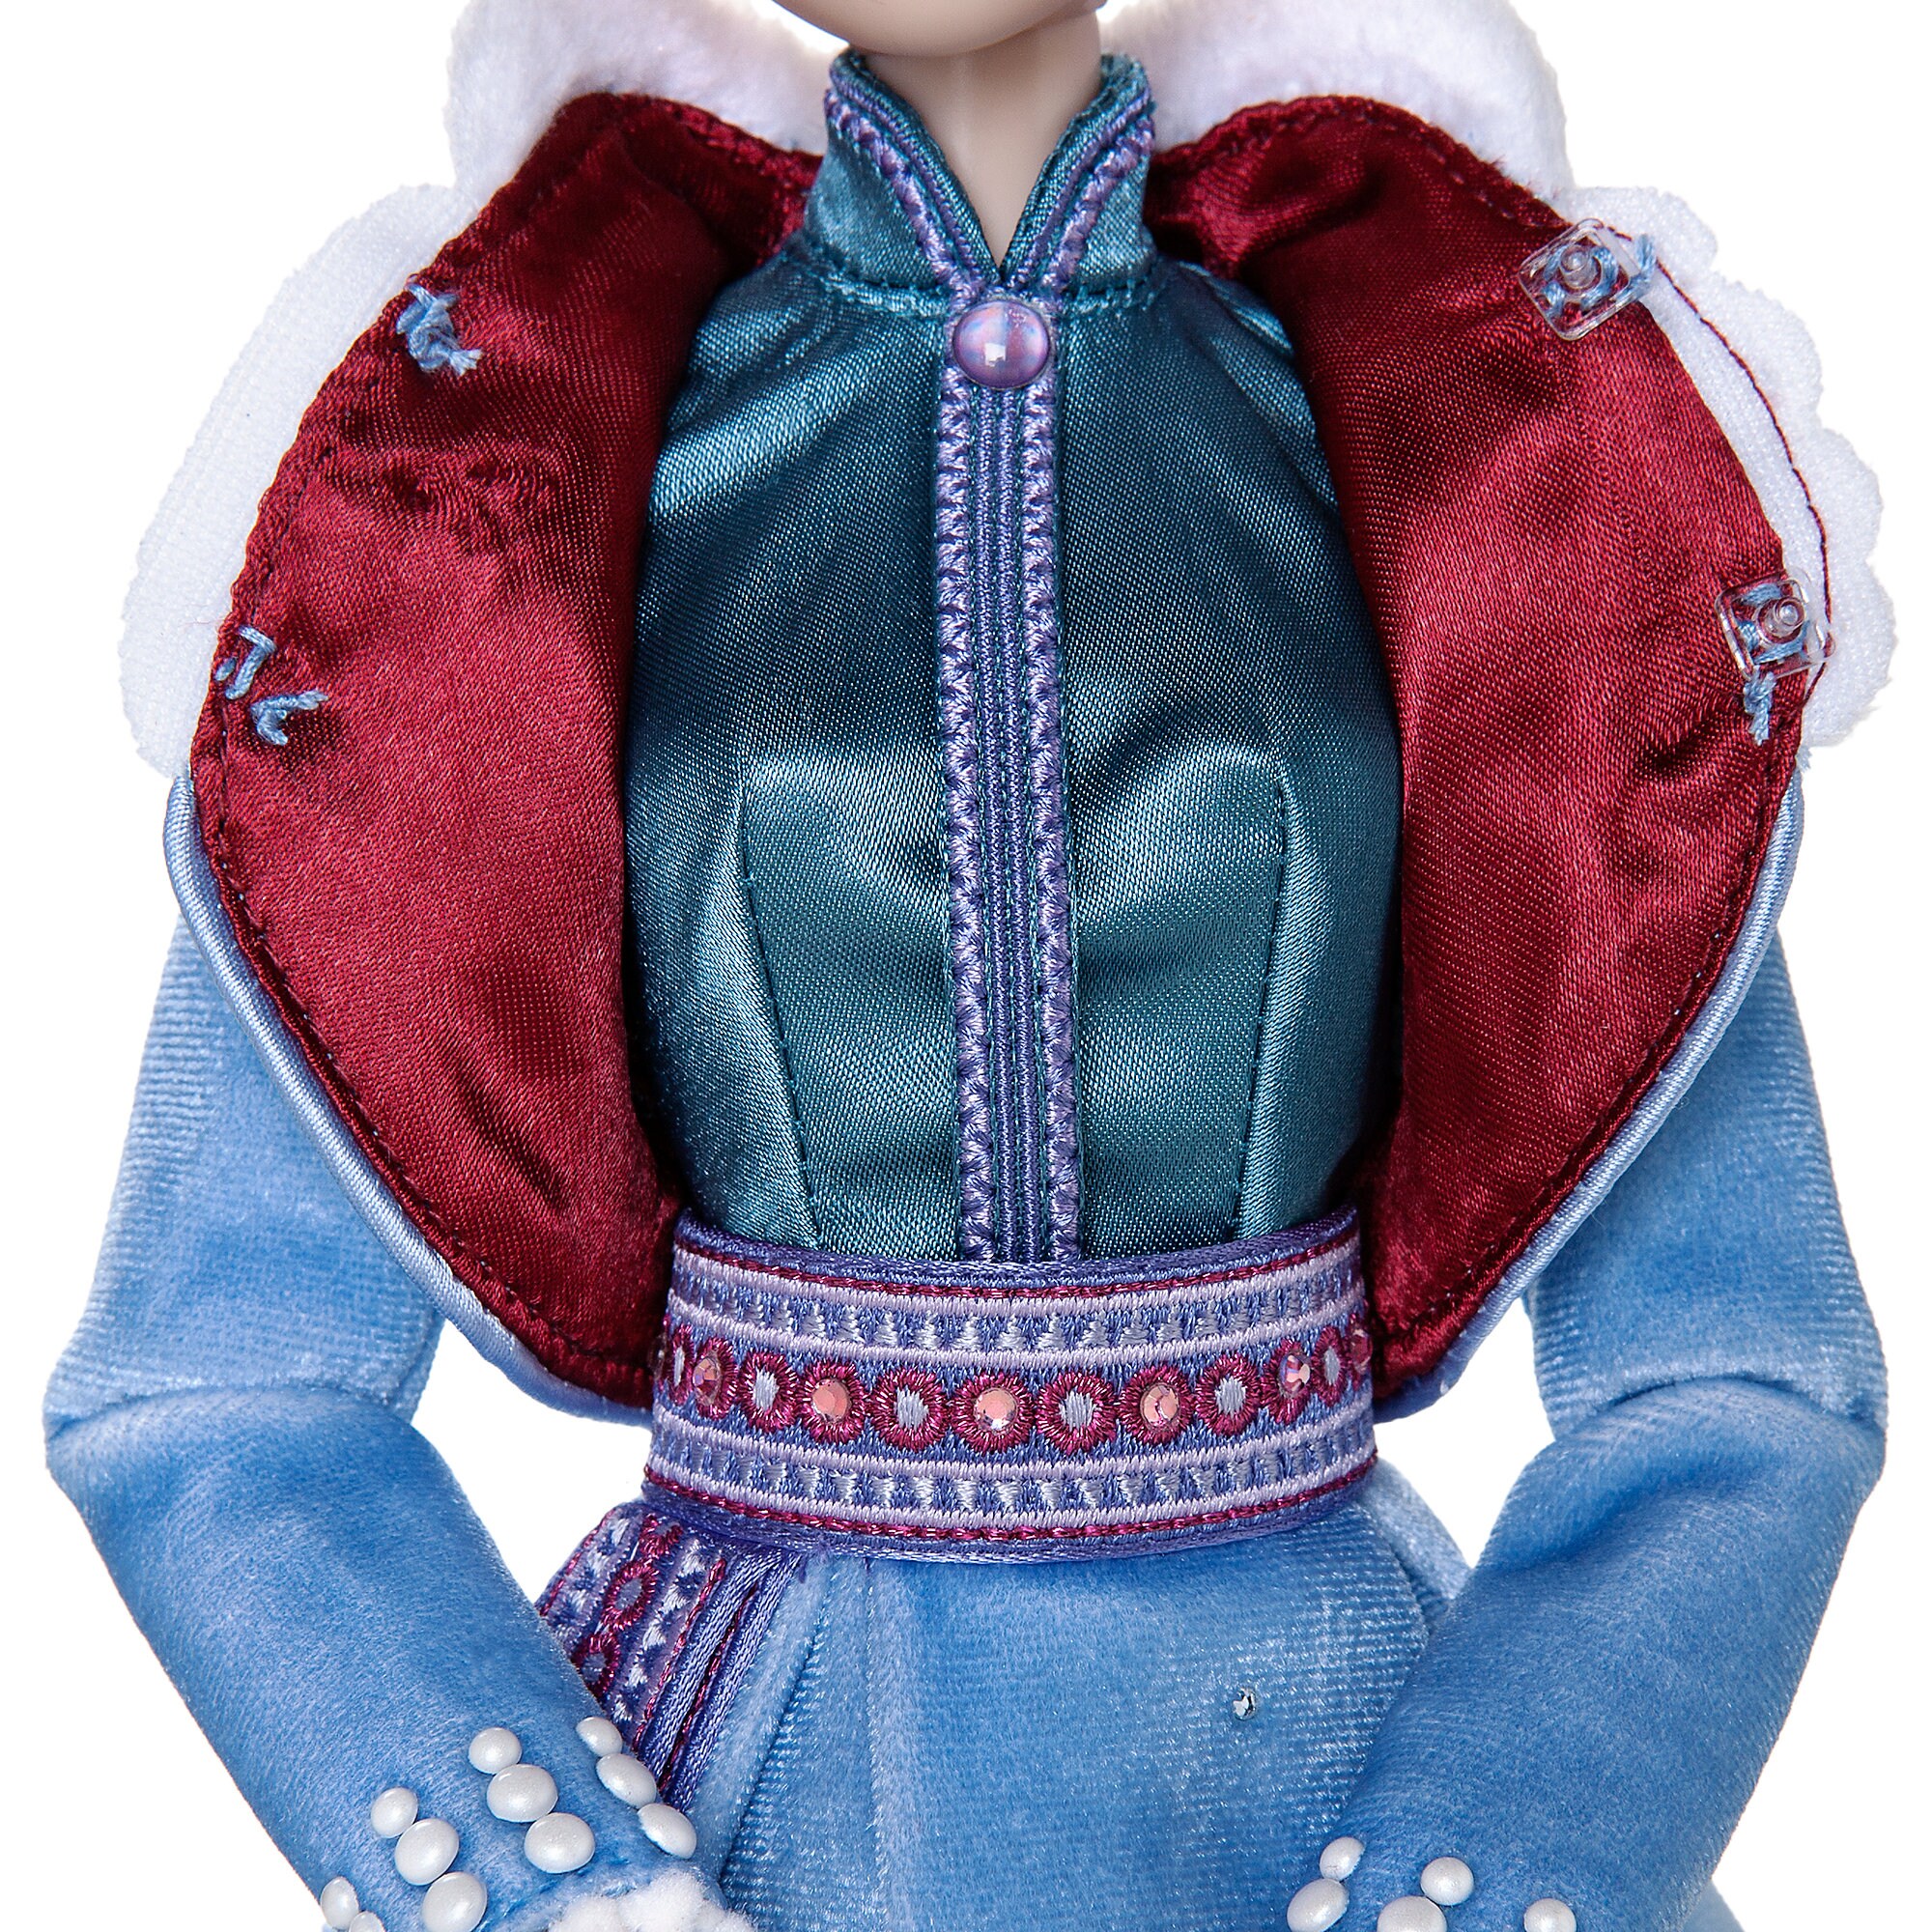 Anna Doll - Olaf's Frozen Adventure - Limited Edition